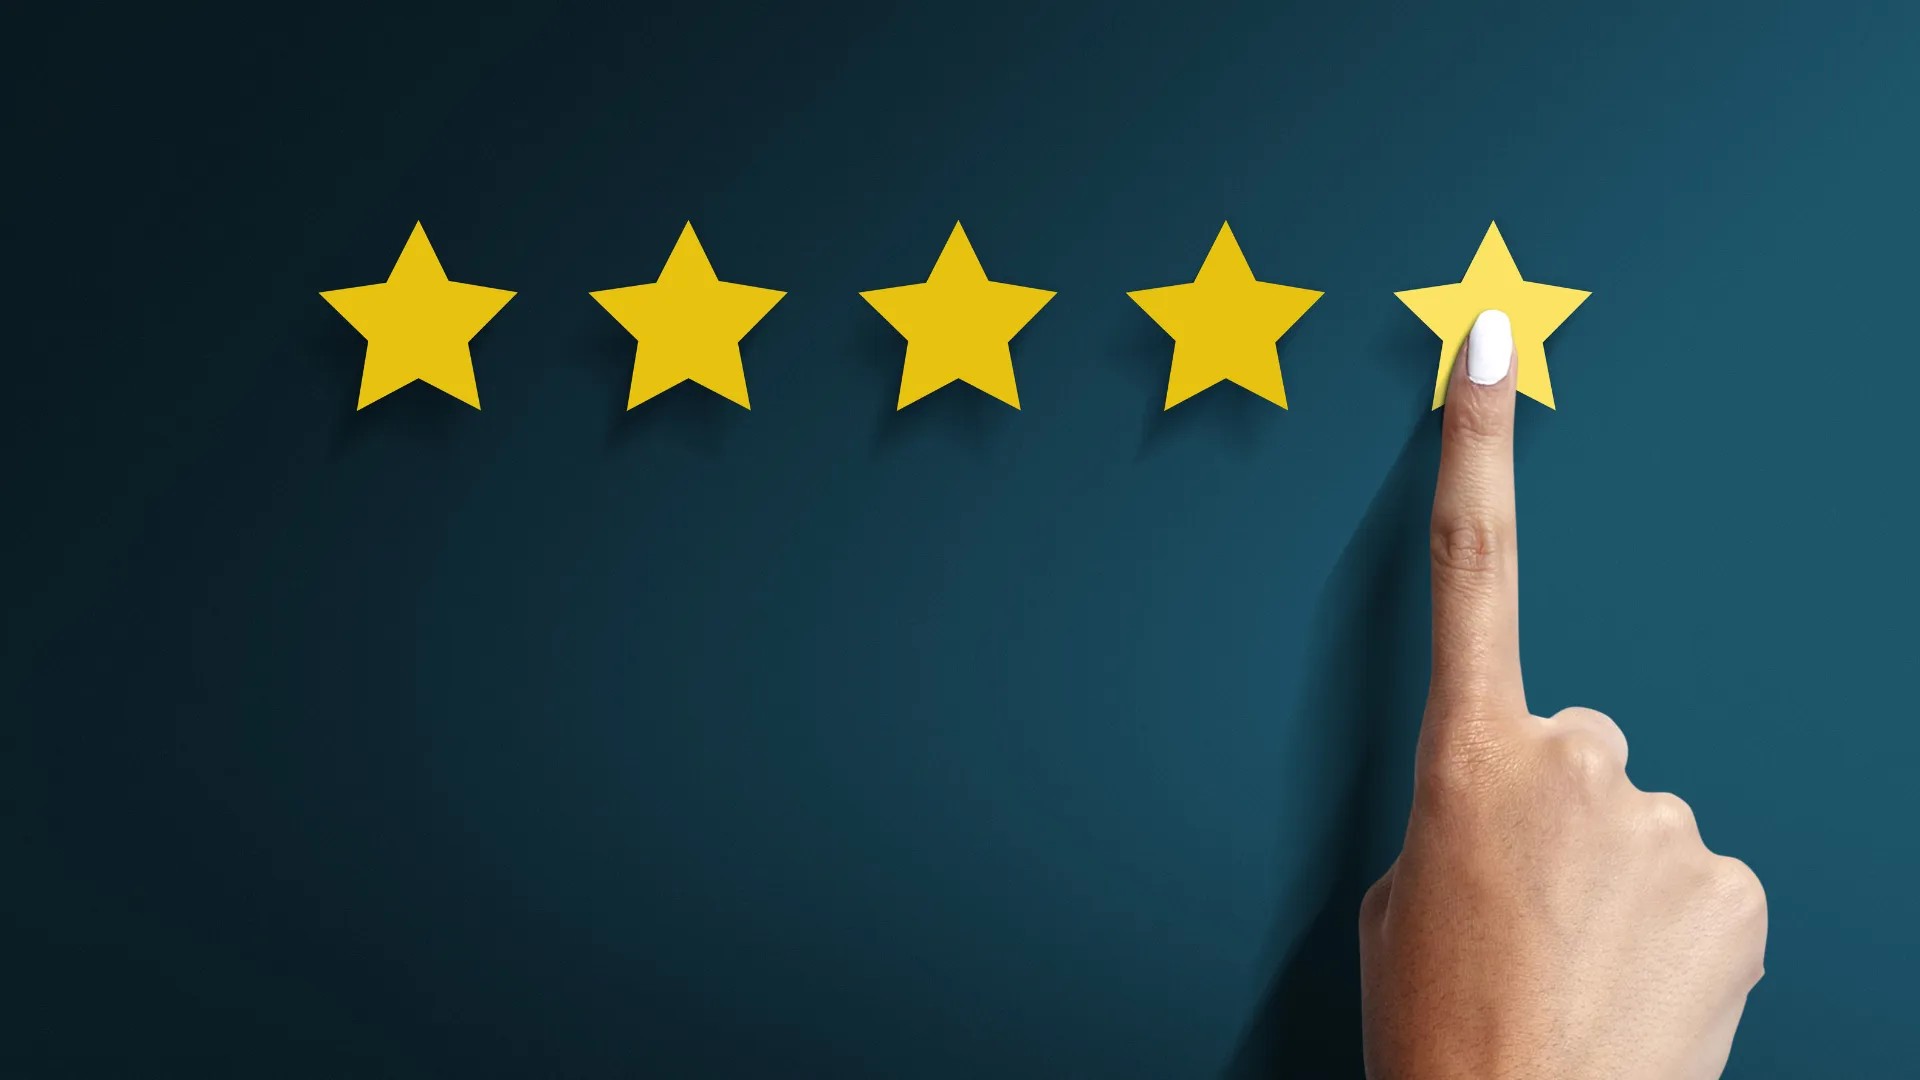 A Dentist's Guide to Collect More Online Reviews